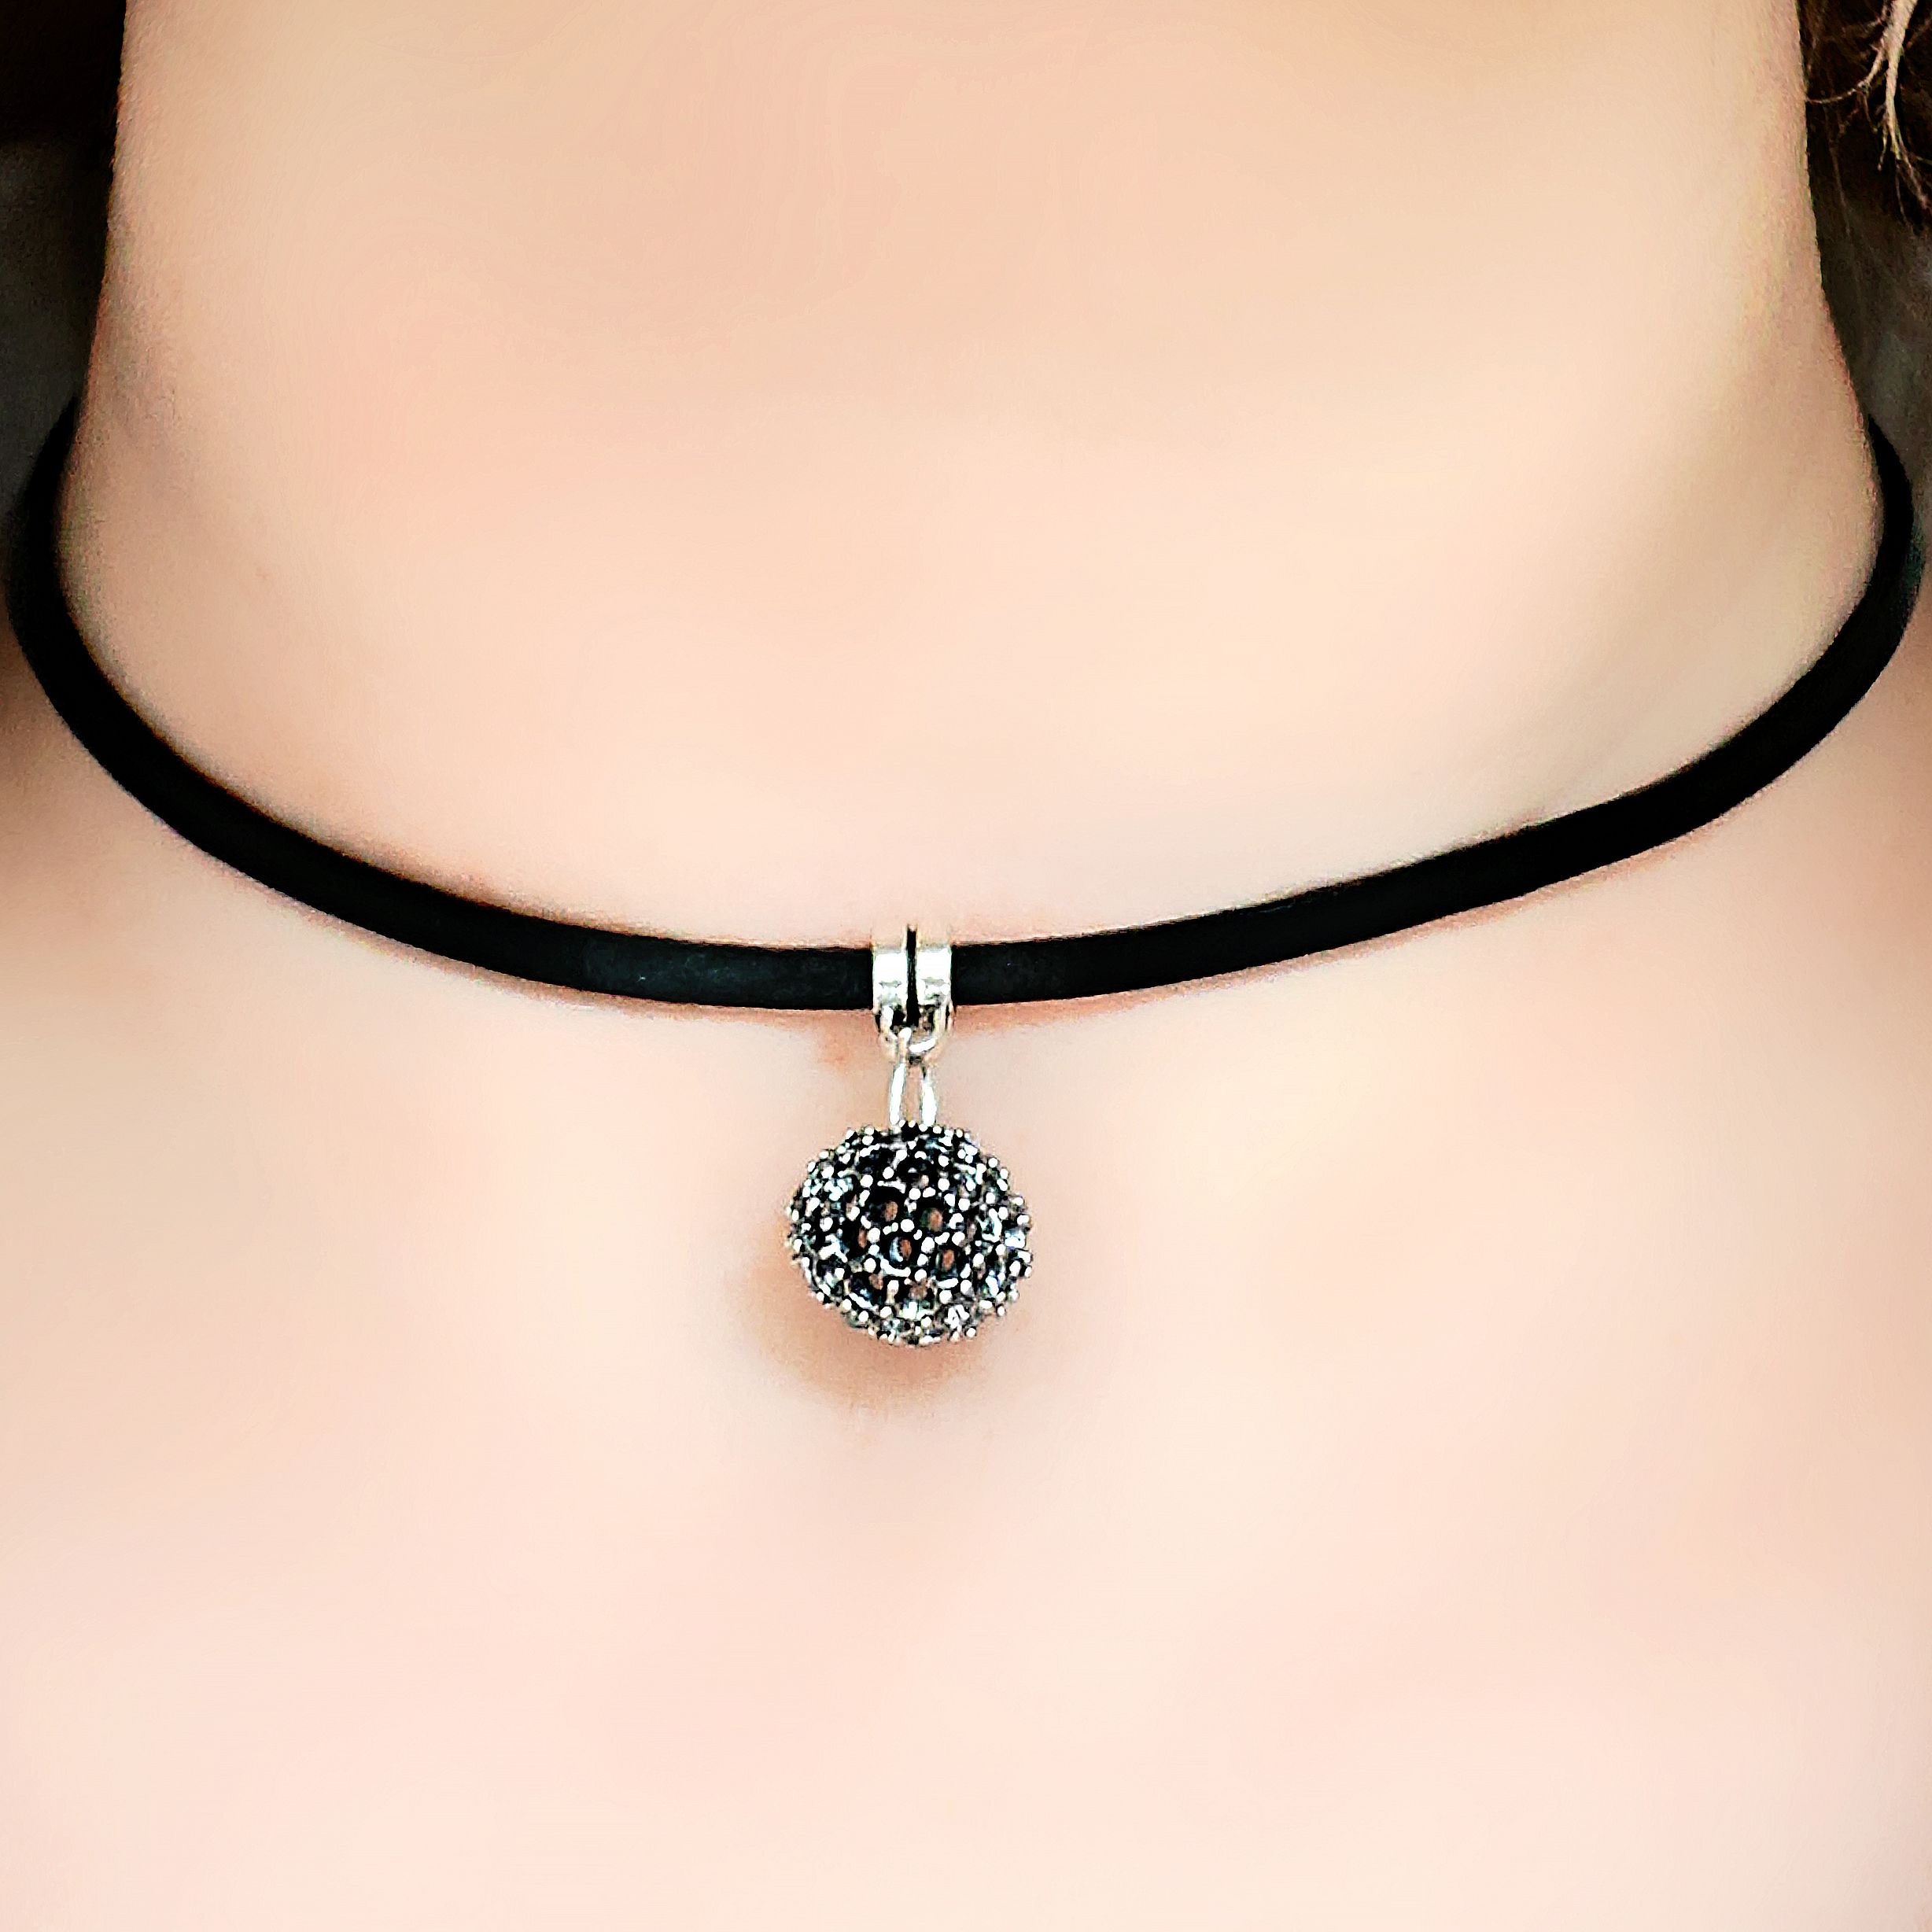 Leather choker necklace for men with black diamonds pendant